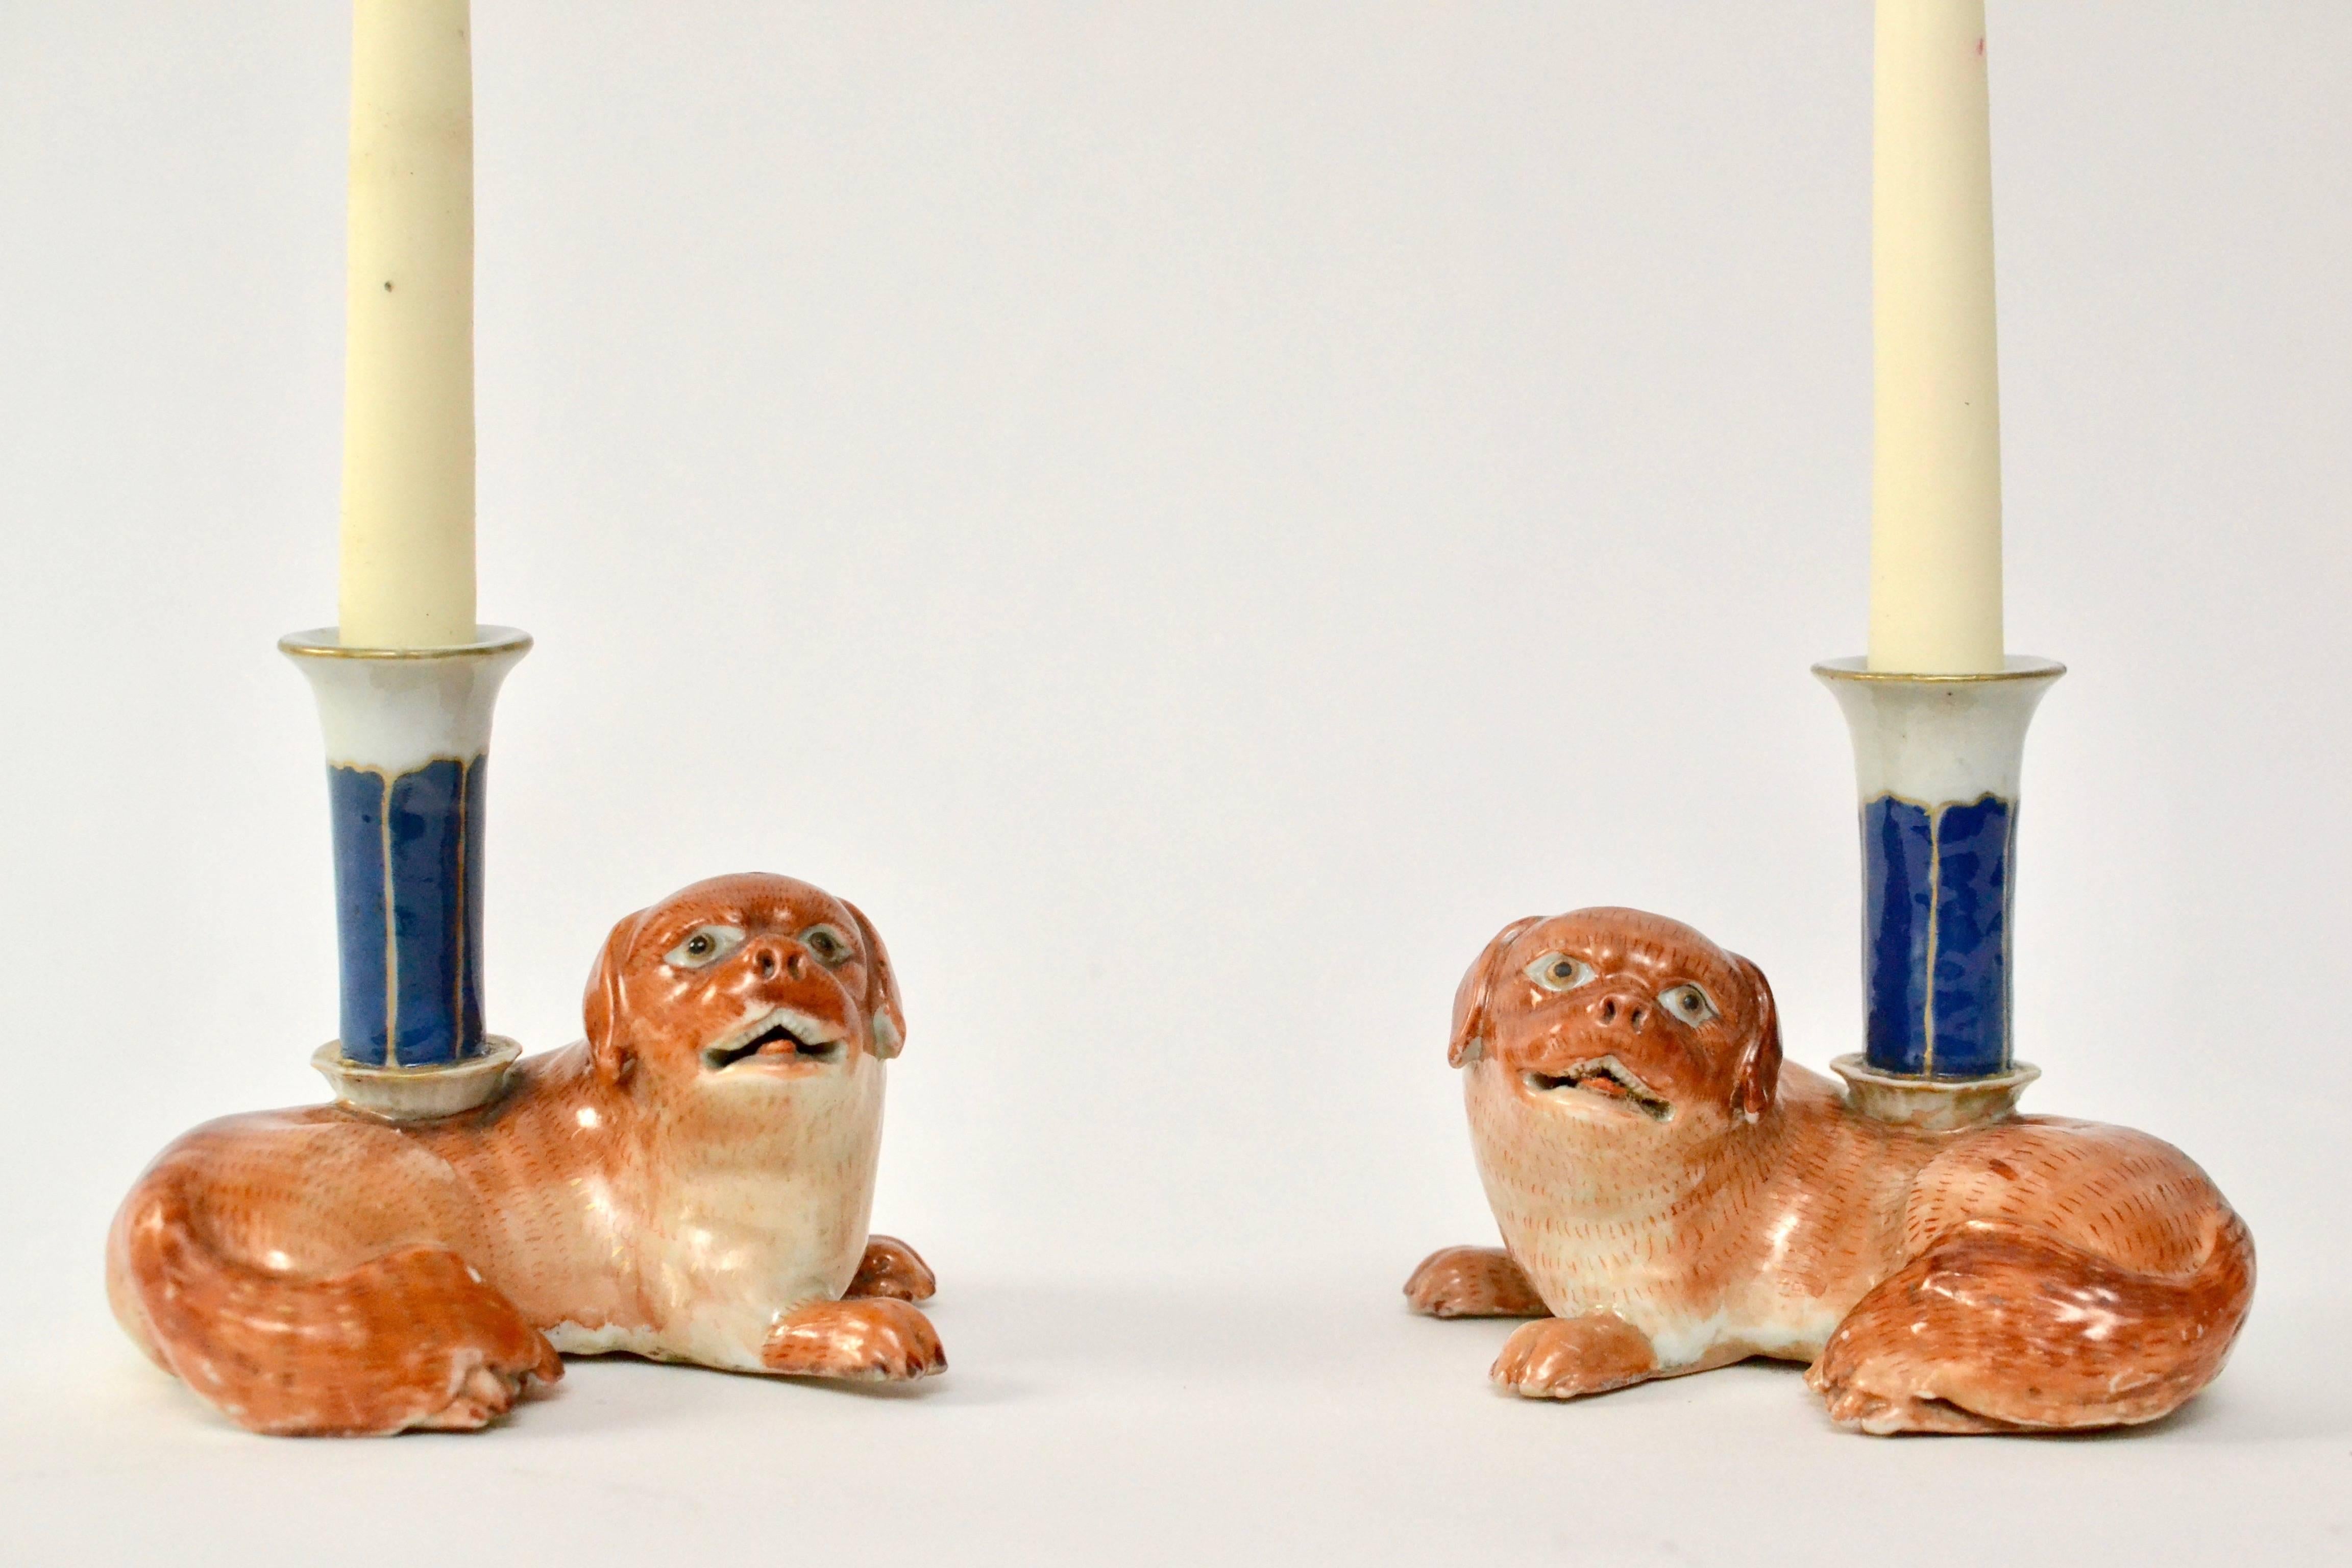 A pair of late 18th century, Chinese export porcelain dog-form candlesticks.